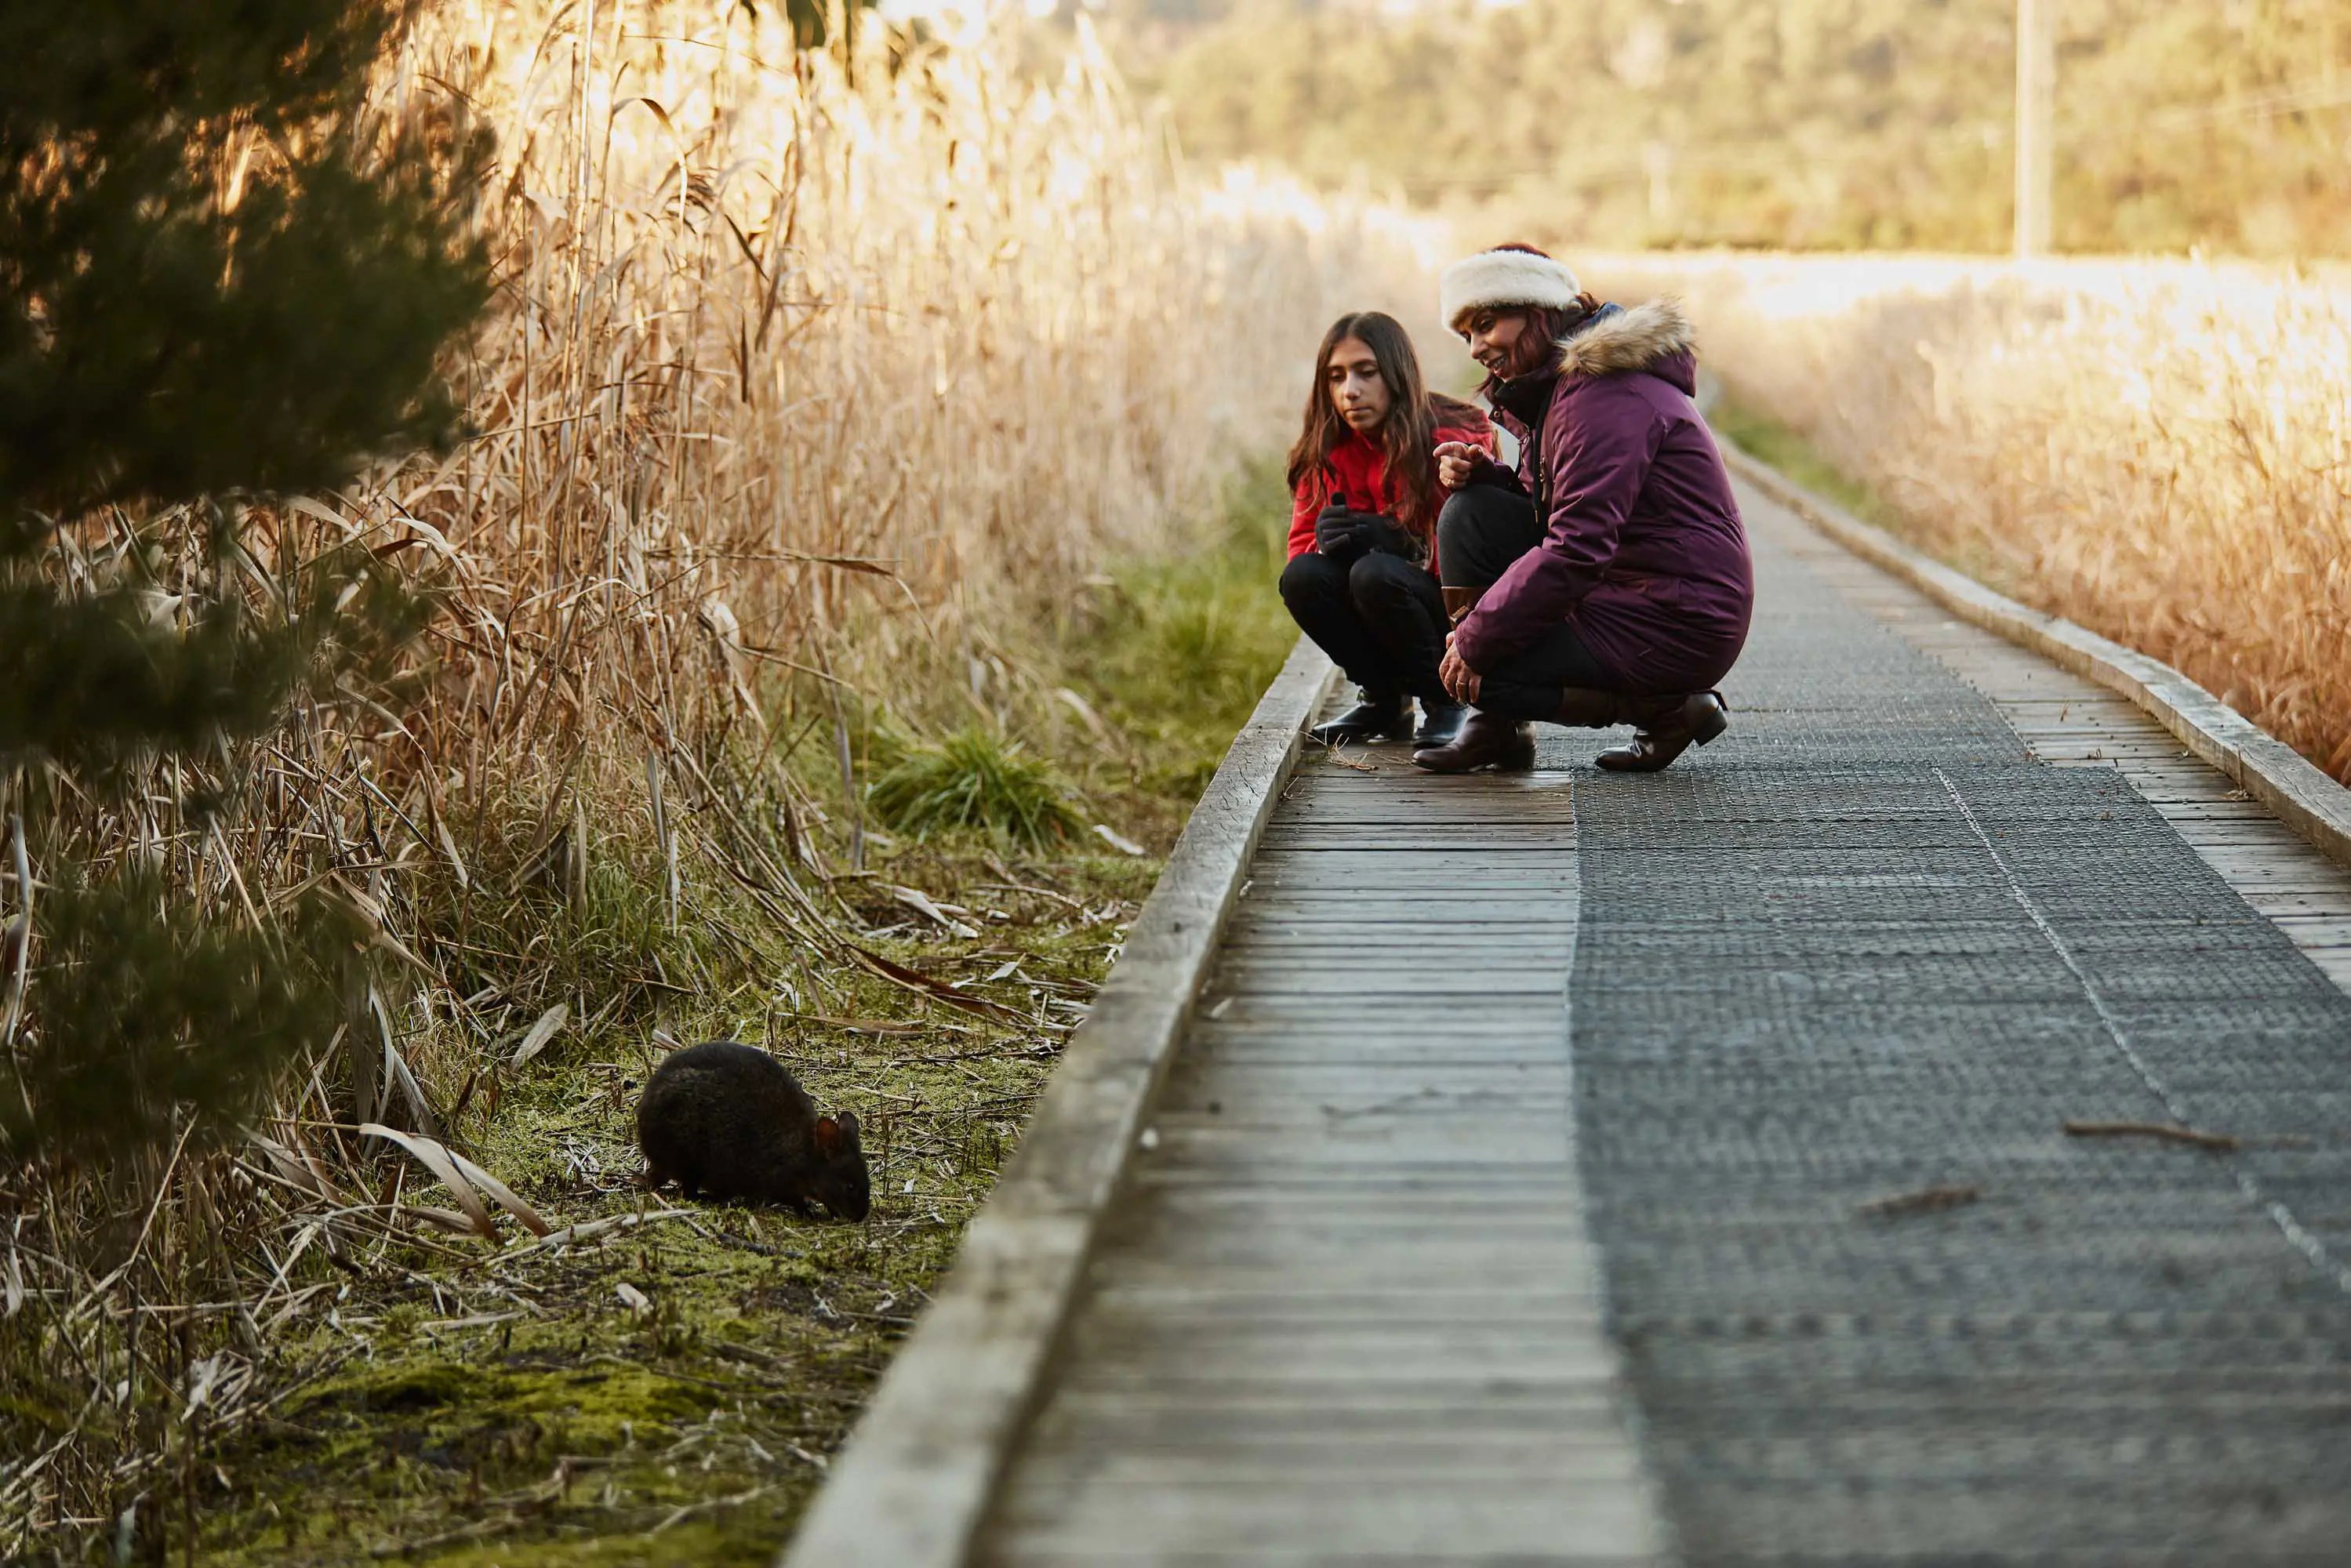 Two peope crouch on a wooden boardwalk and get a closer look at small, dark-furred animal eating grass below.